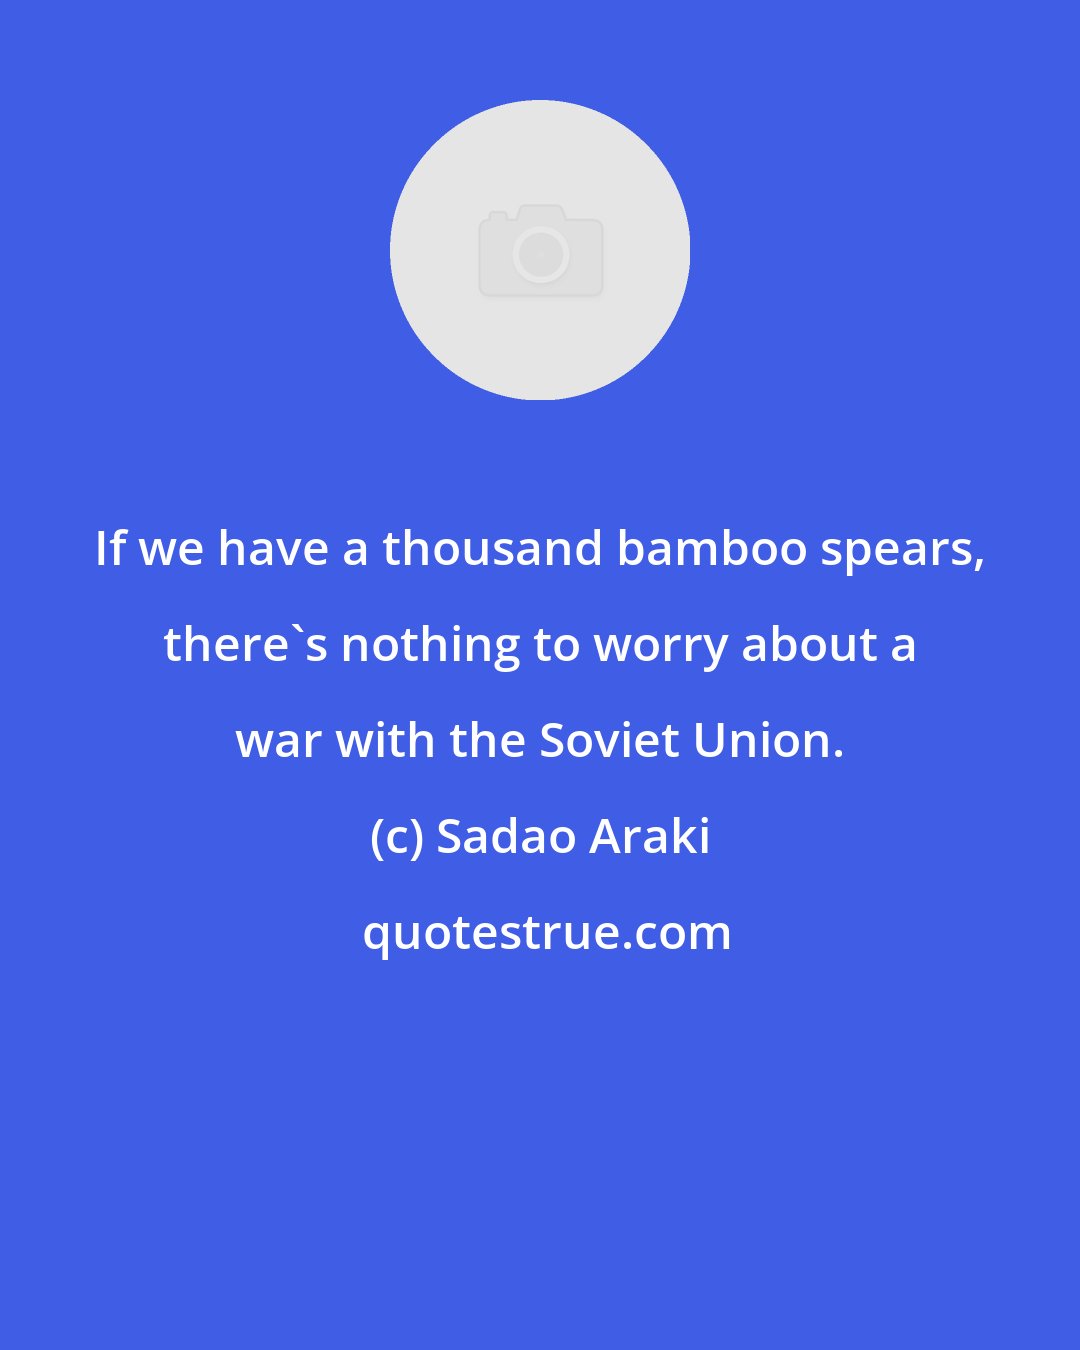 Sadao Araki: If we have a thousand bamboo spears, there's nothing to worry about a war with the Soviet Union.